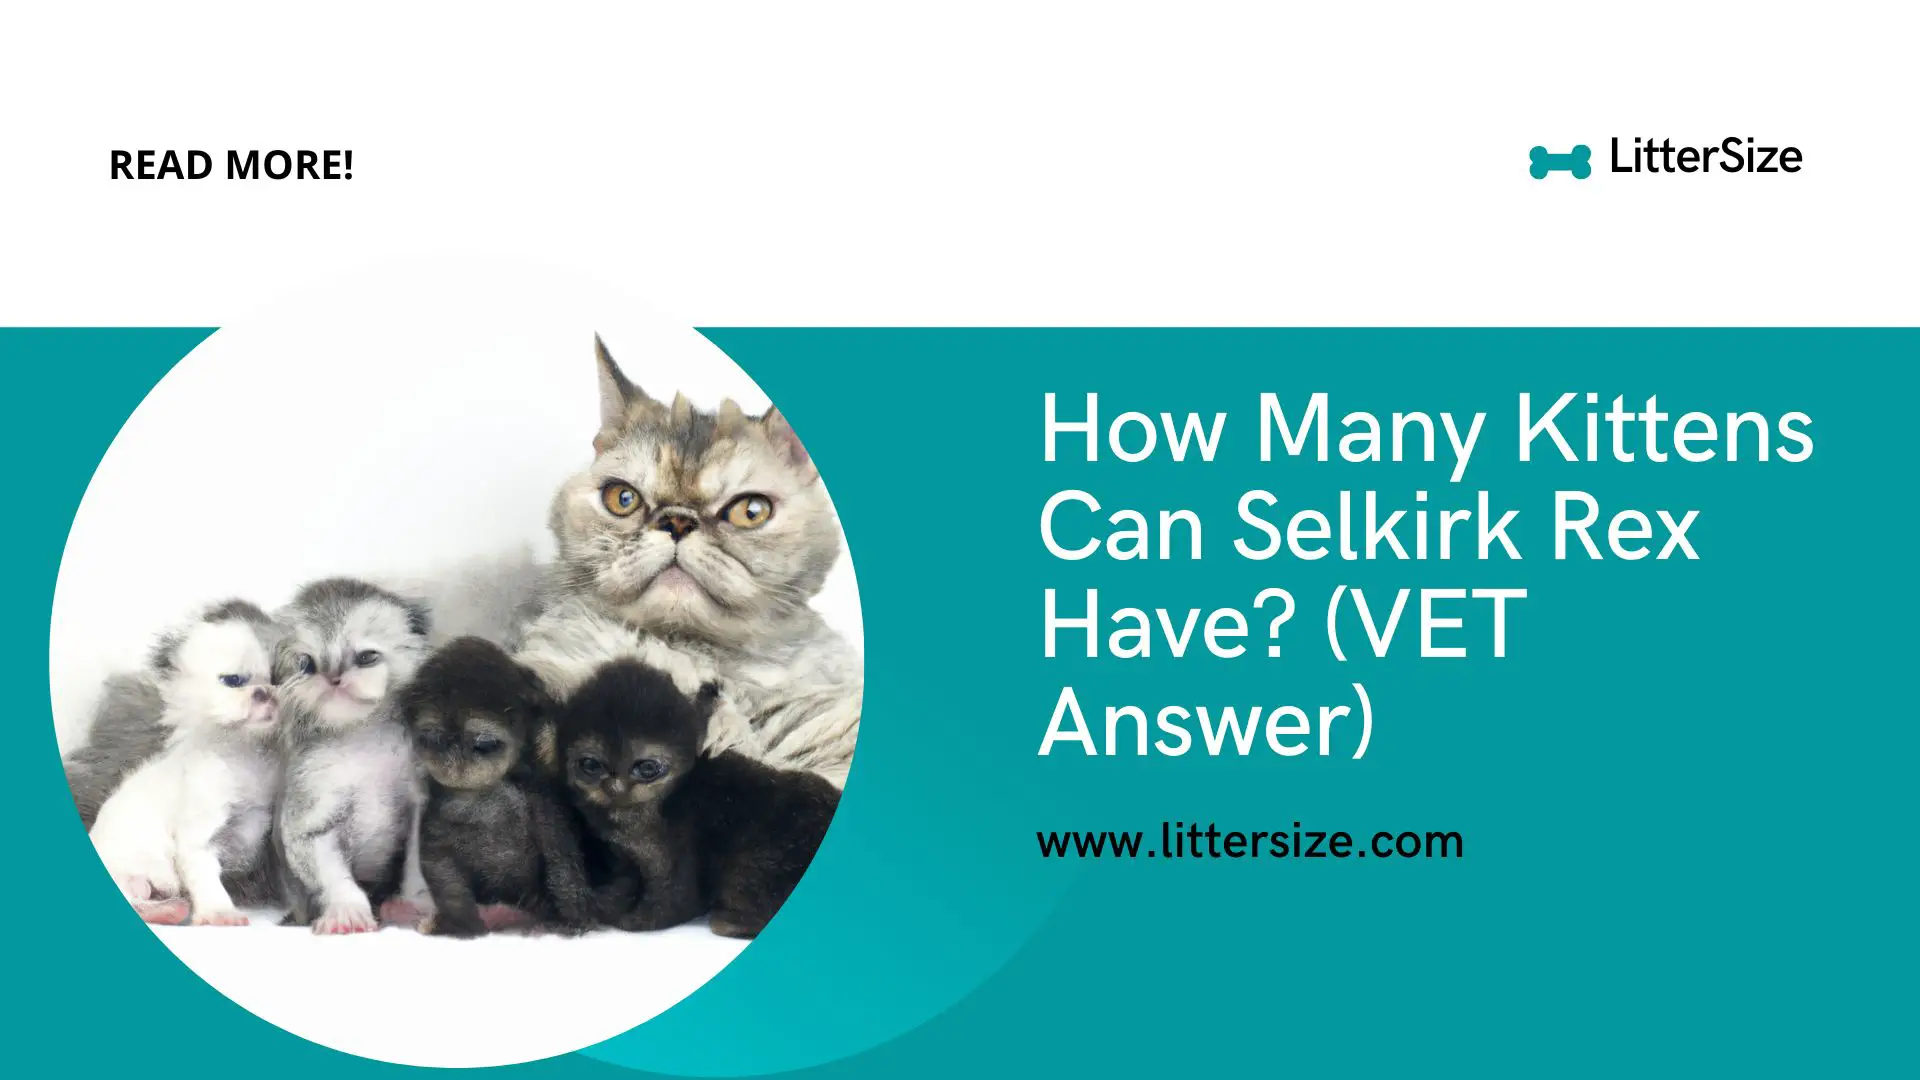 How Many Kittens Can Selkirk Rex Have? (VET Answer)